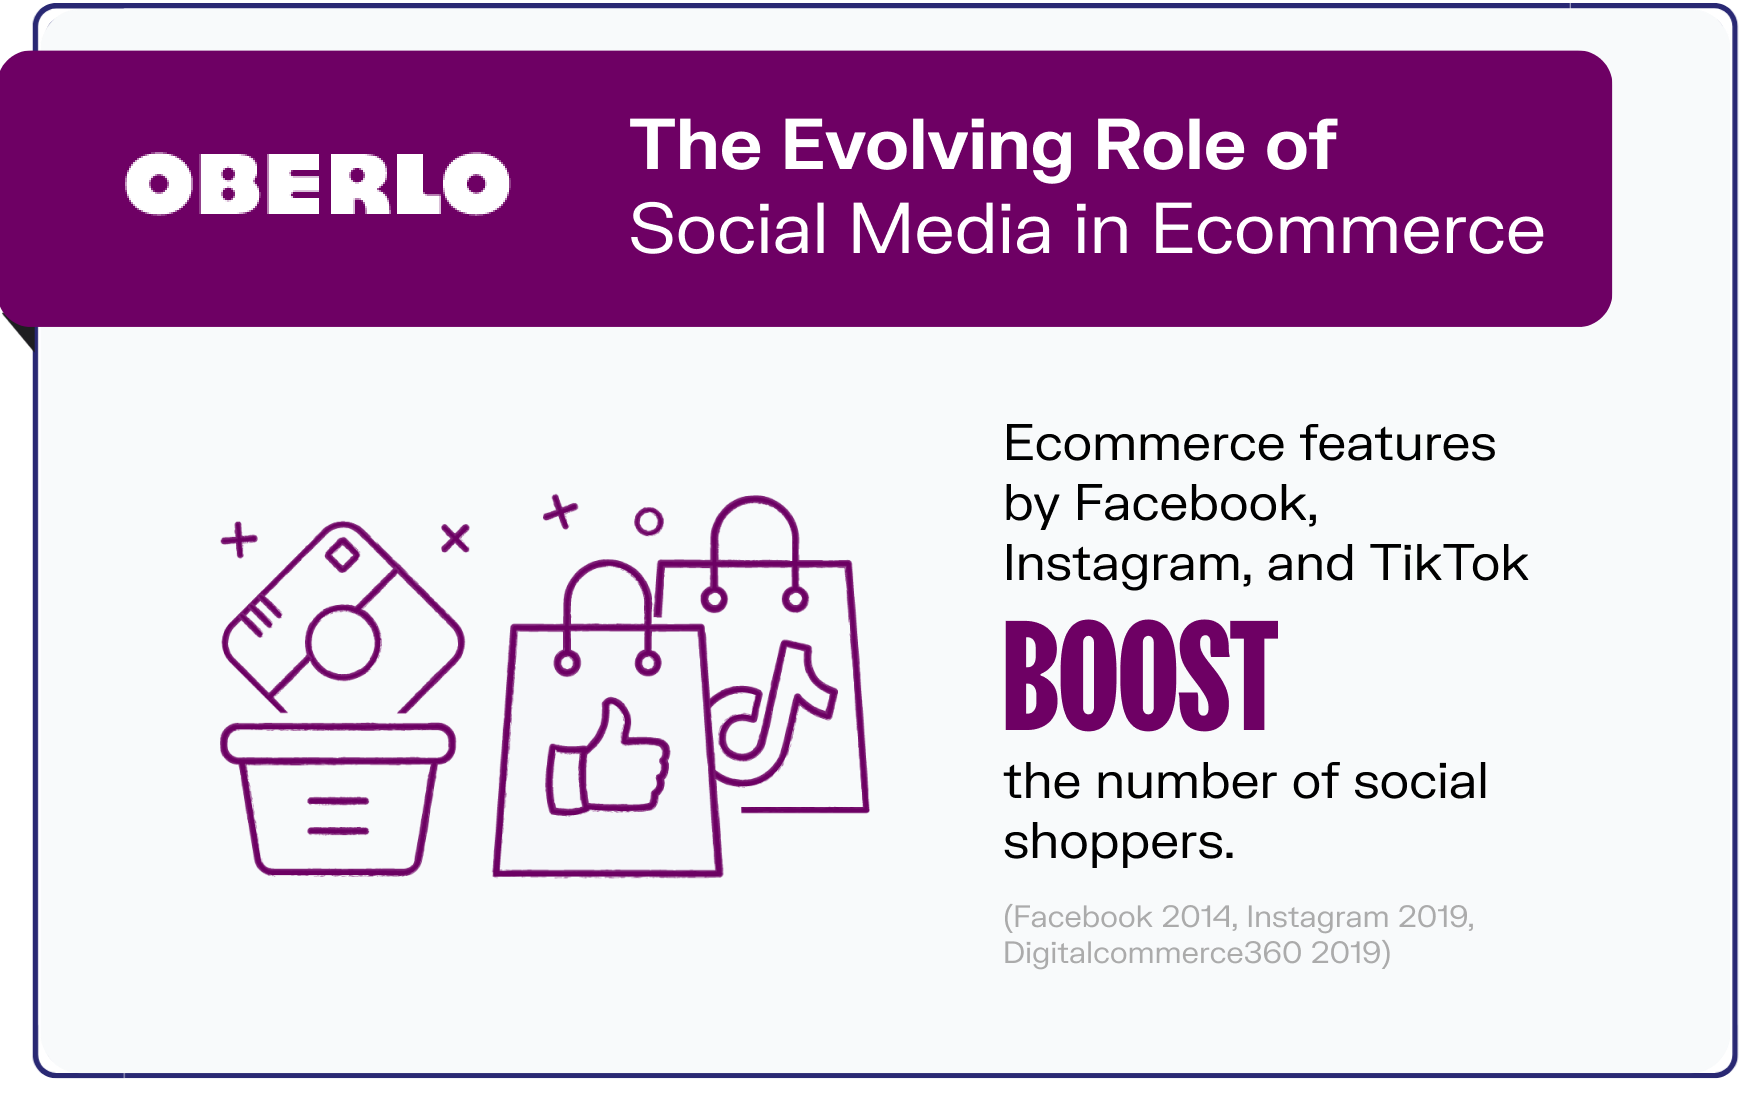 ecommerce trends graphic5